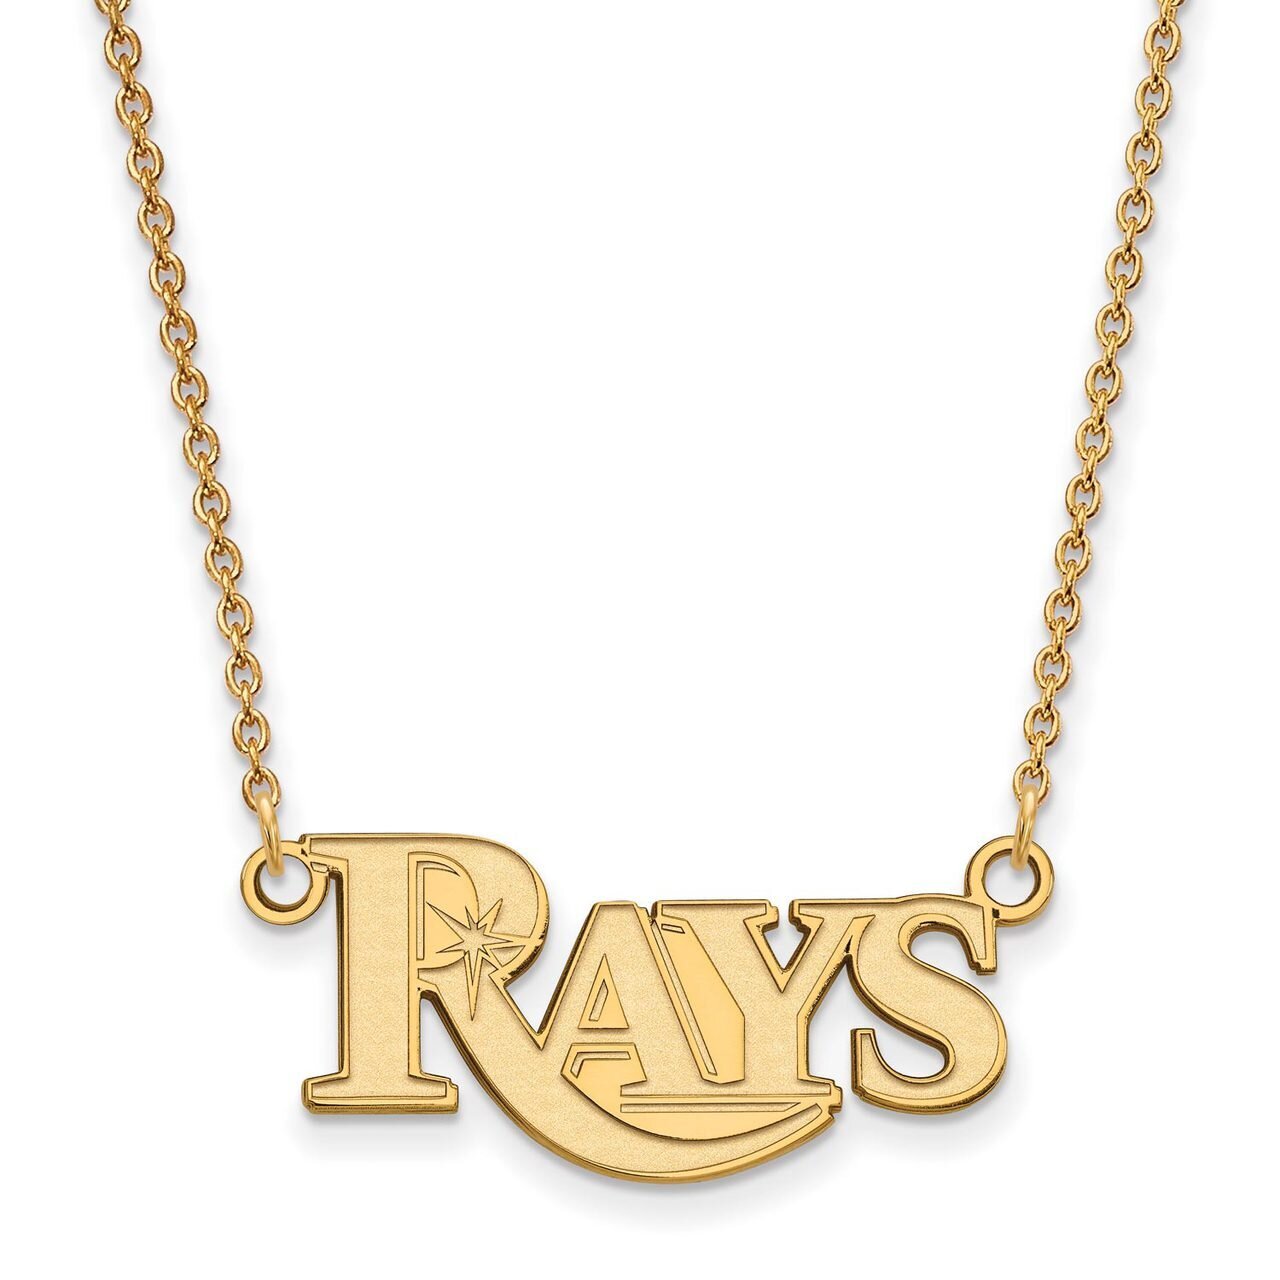 Tampa Bay Rays Small Pendant with Chain Necklace Gold-plated Silver GP018DEV-18